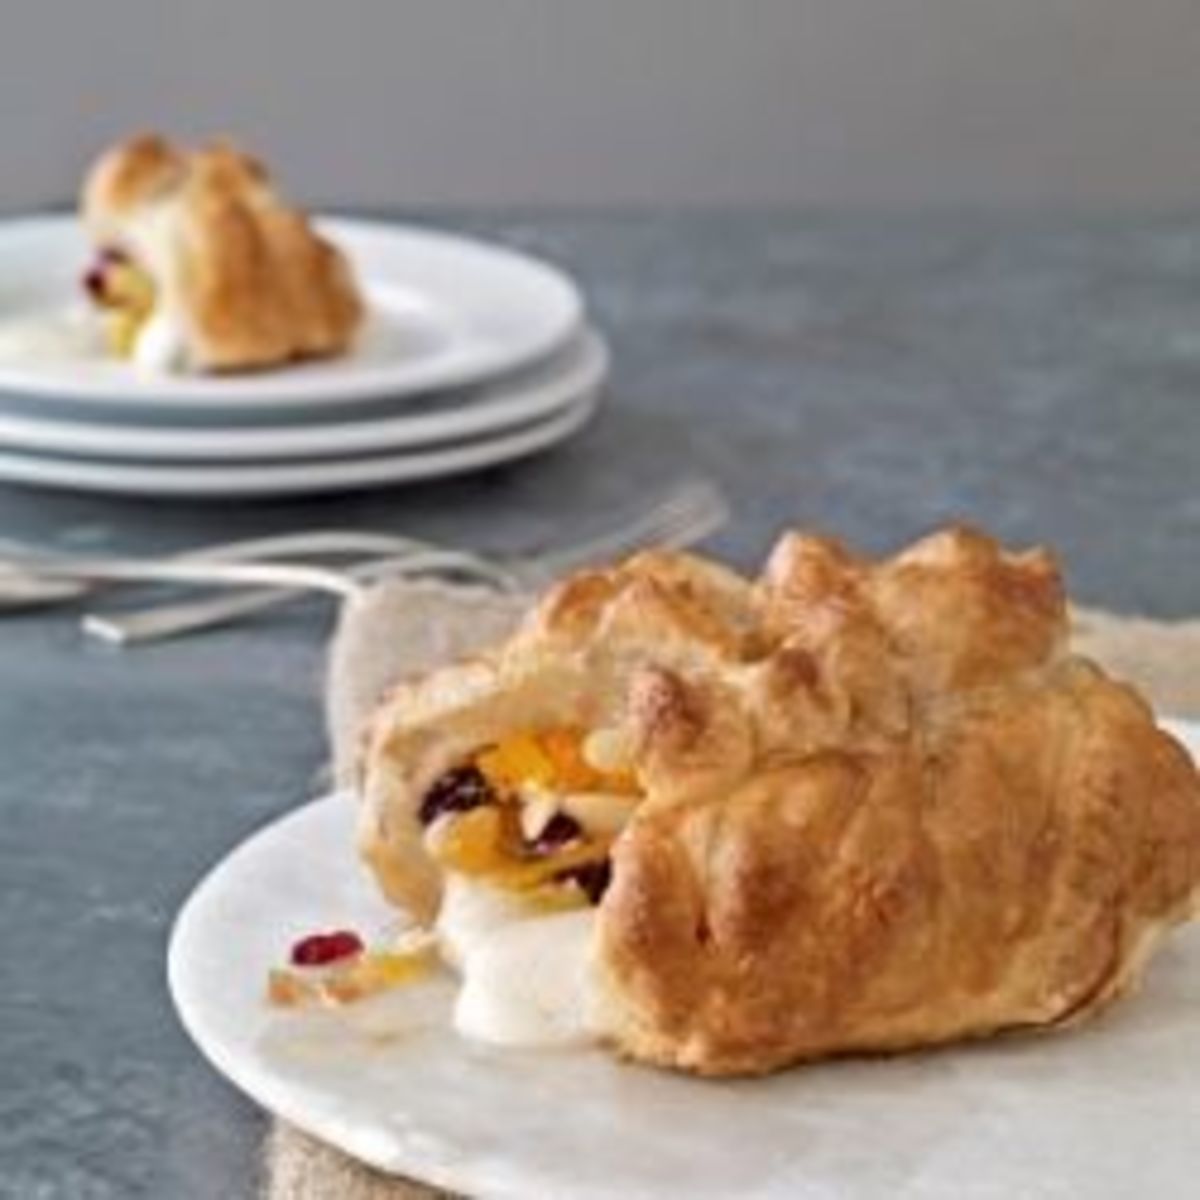 Baked Brie with Apricots, Cranberries, and Honey from Good Housekeeping